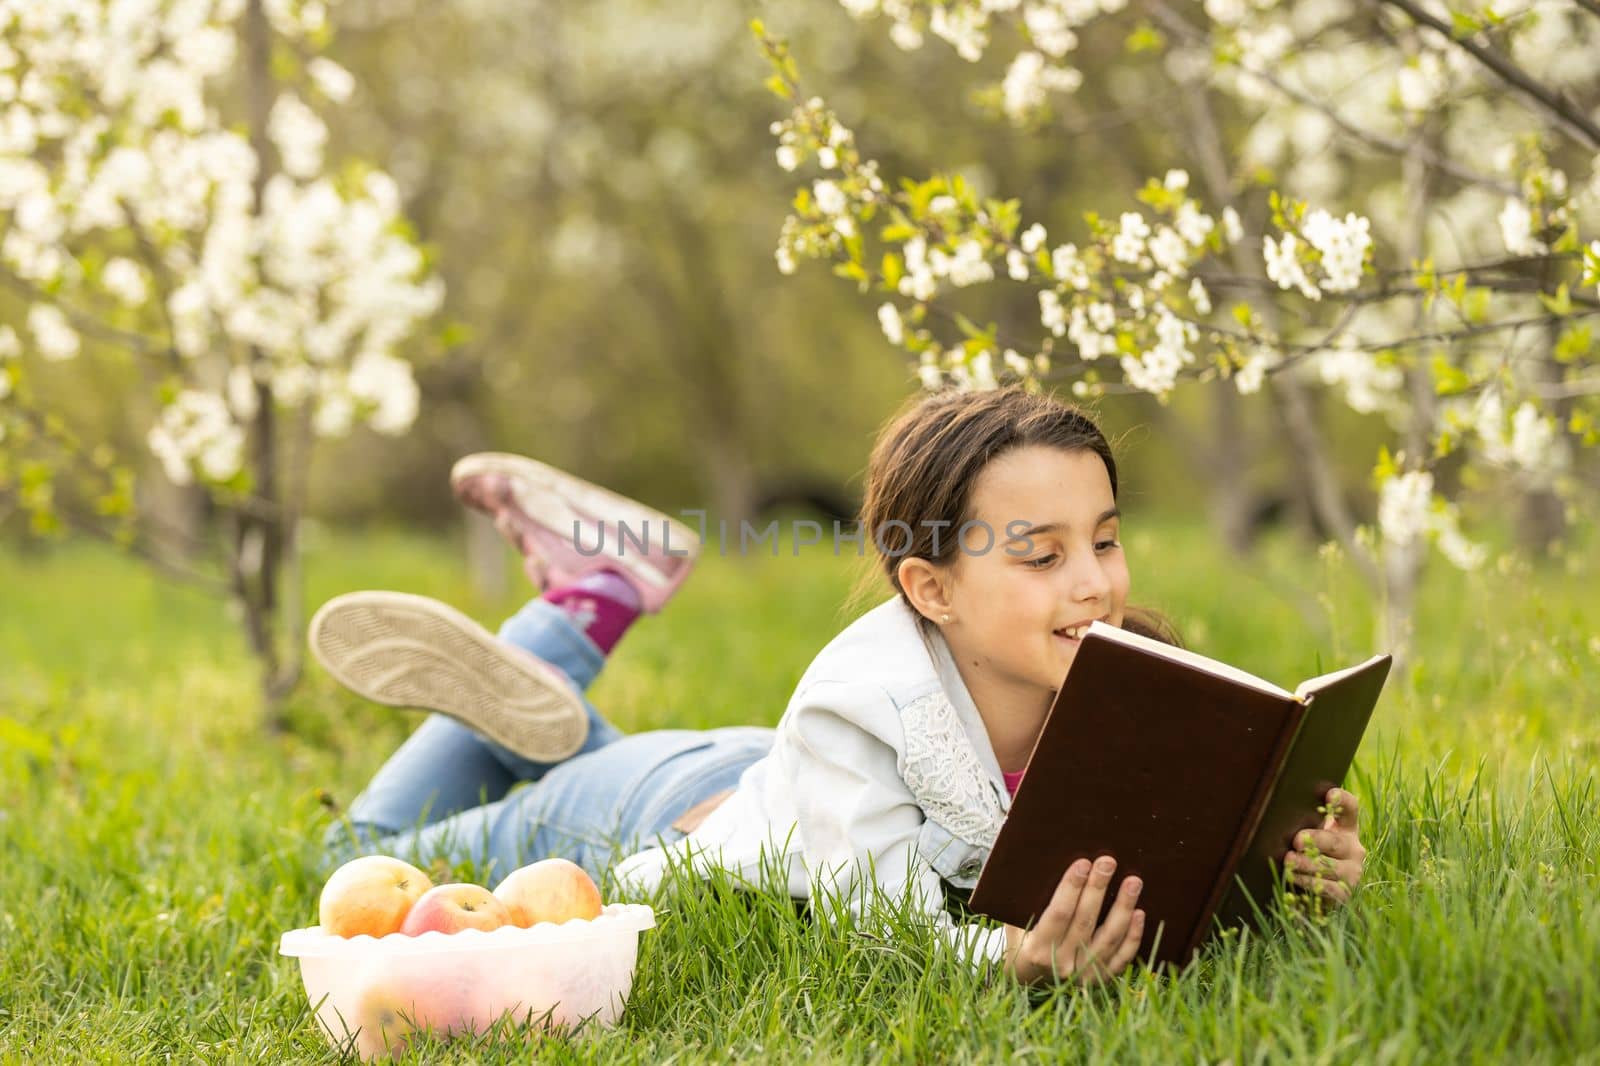 little girl with a bible in the garden by Andelov13